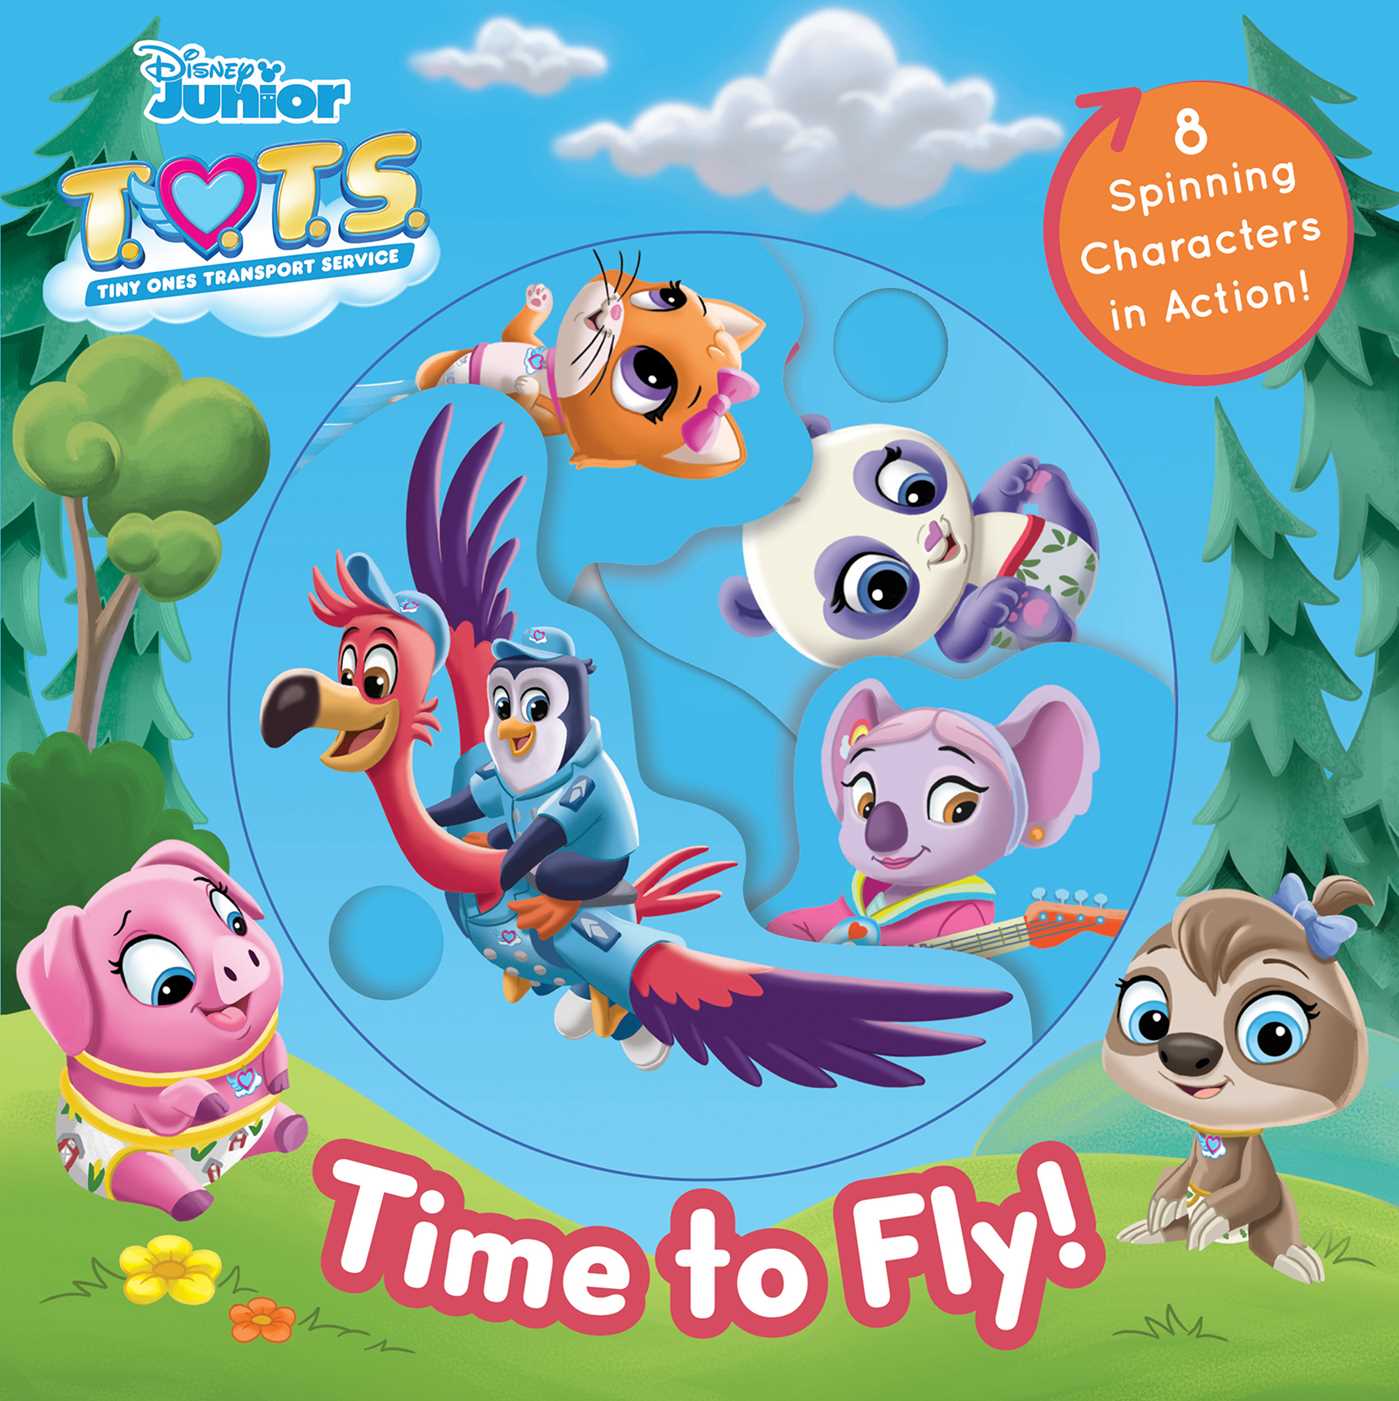 Disney Junior T.O.T.S.: Time to Fly!. Book by Editors of Studio Fun International. Official Publisher Page. Simon & Schuster